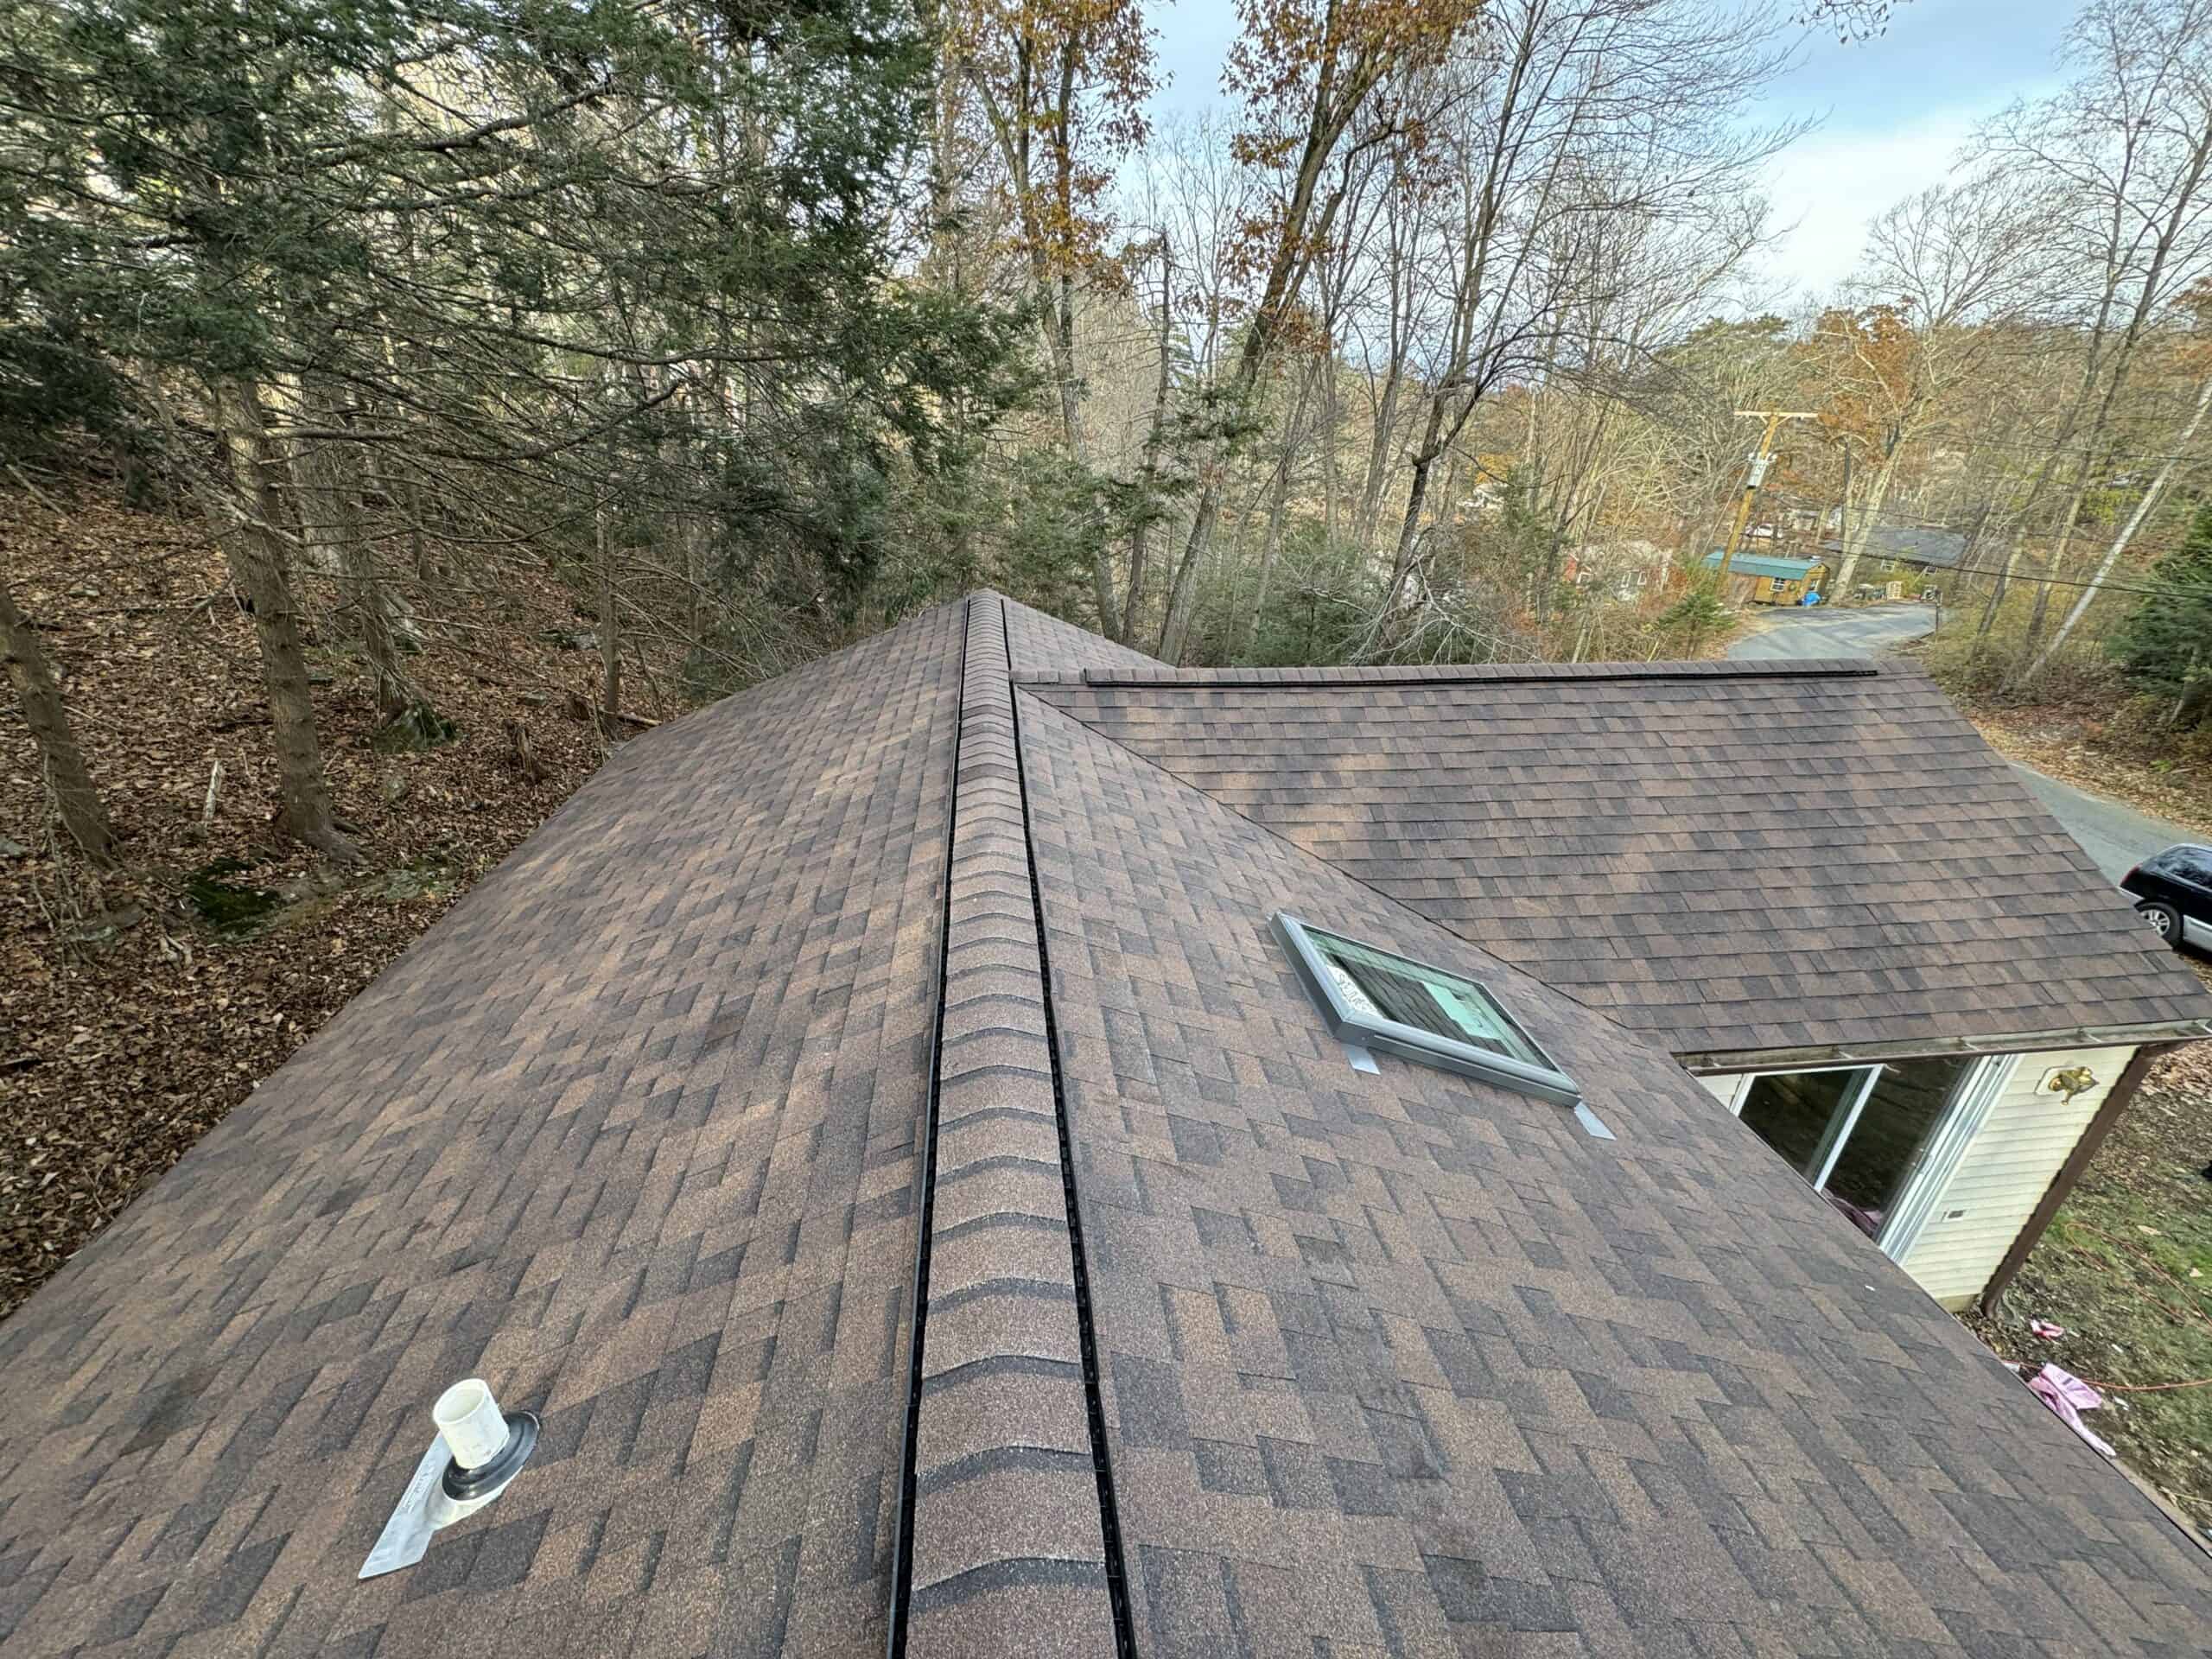 the roof of a house with a brown shingled roof.